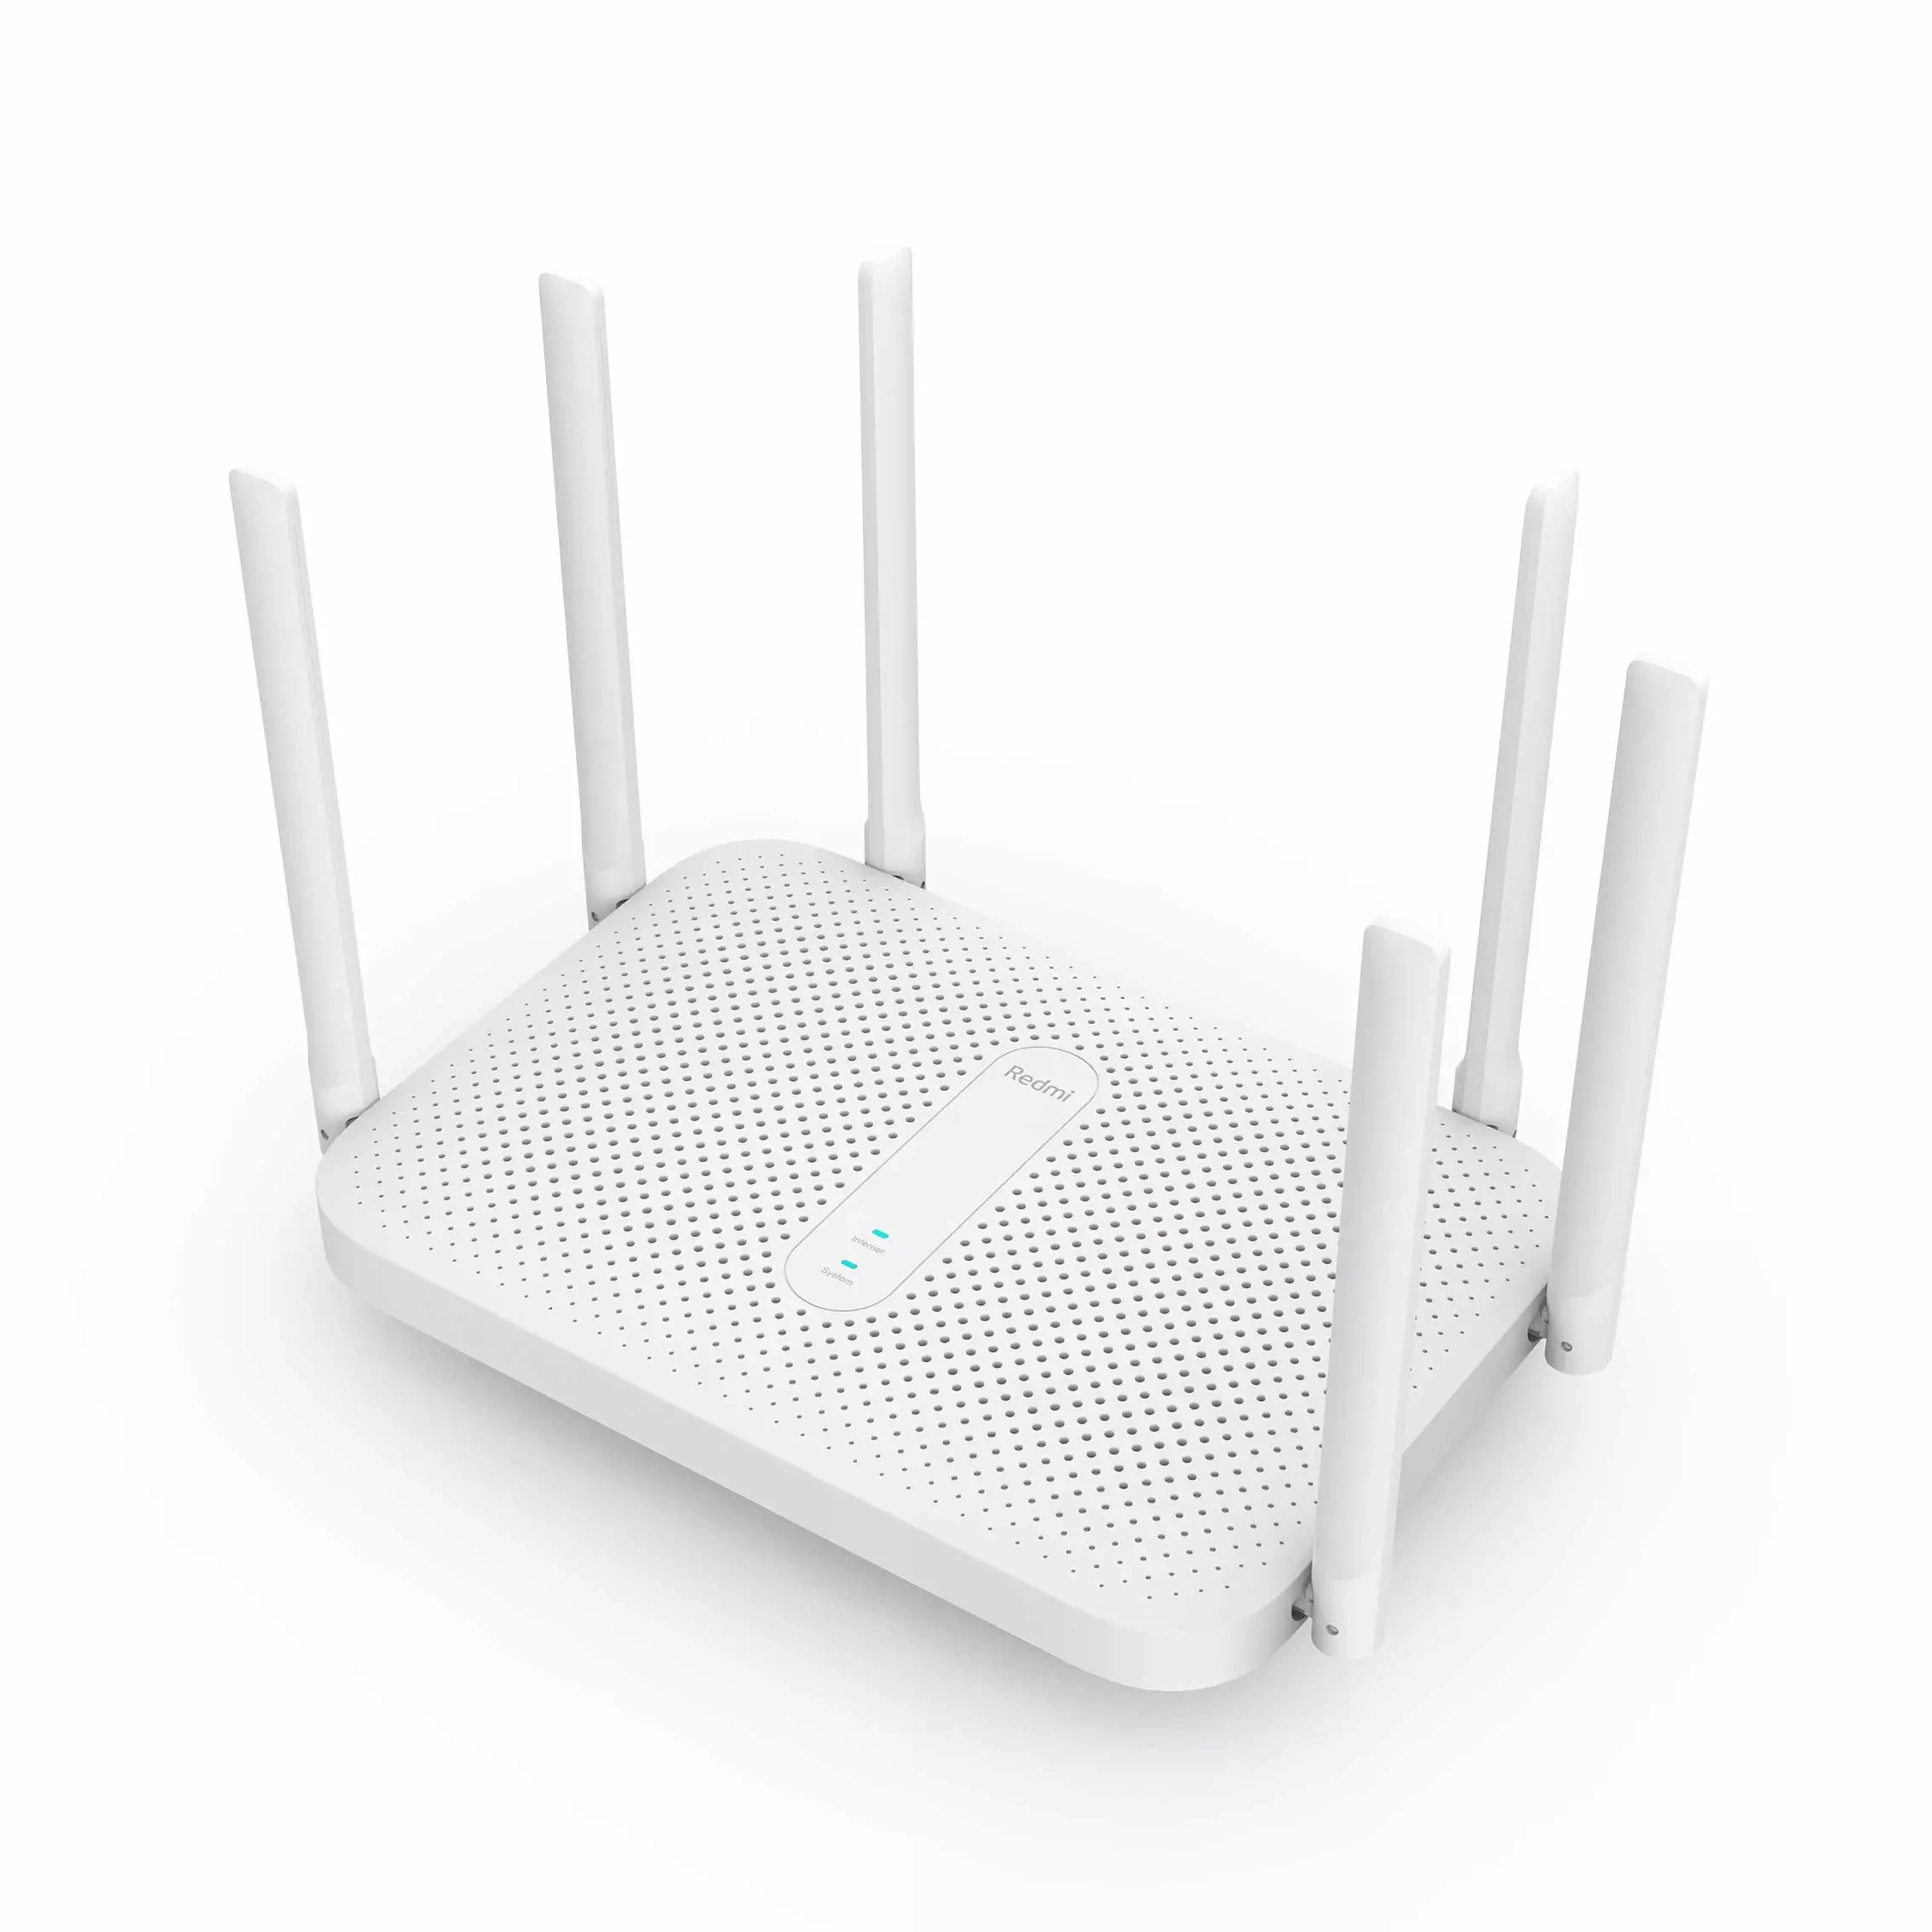 

Xiaomi Redmi Router AC2100 Gigabit 2.4G 5.0GHz Dual-Band 2033Mbps Wireless Router Wifi Repeater With 6 High Gain Antennas Wider